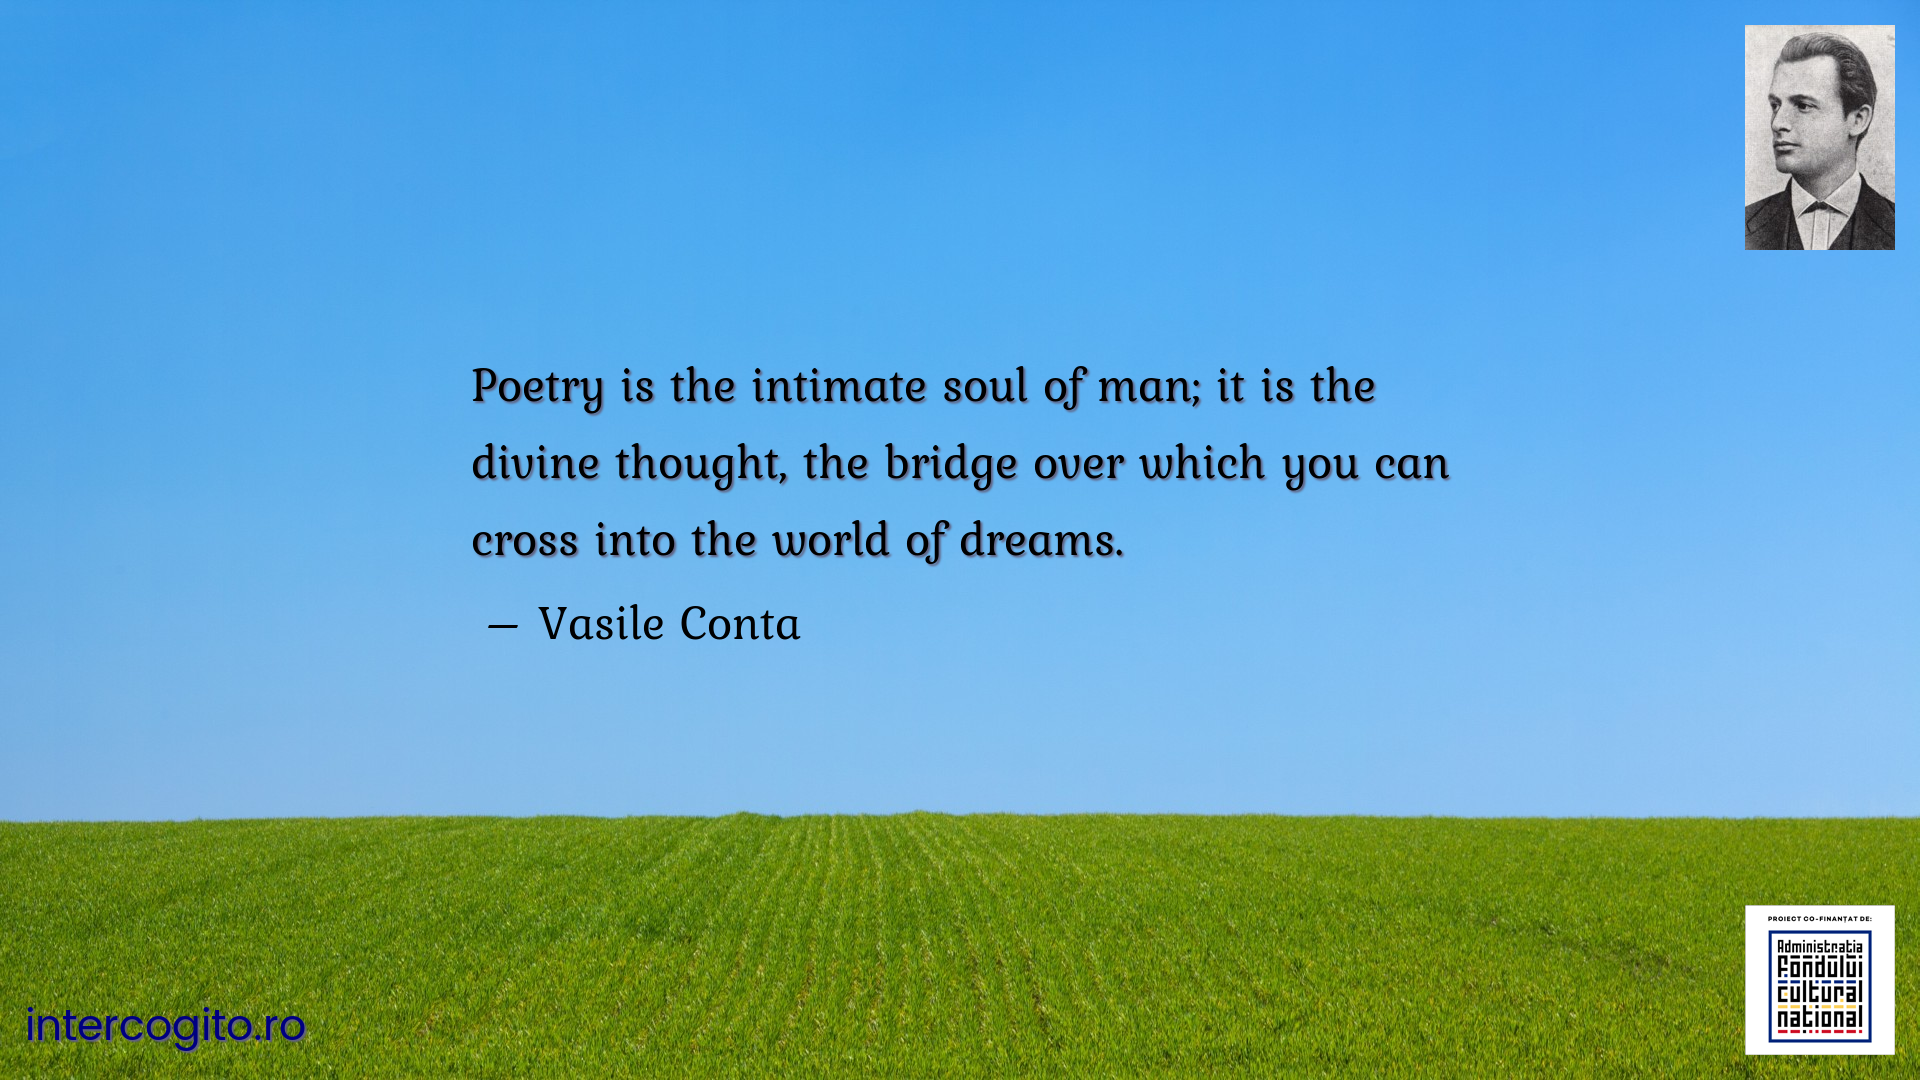 Poetry is the intimate soul of man; it is the divine thought, the bridge over which you can cross into the world of dreams.